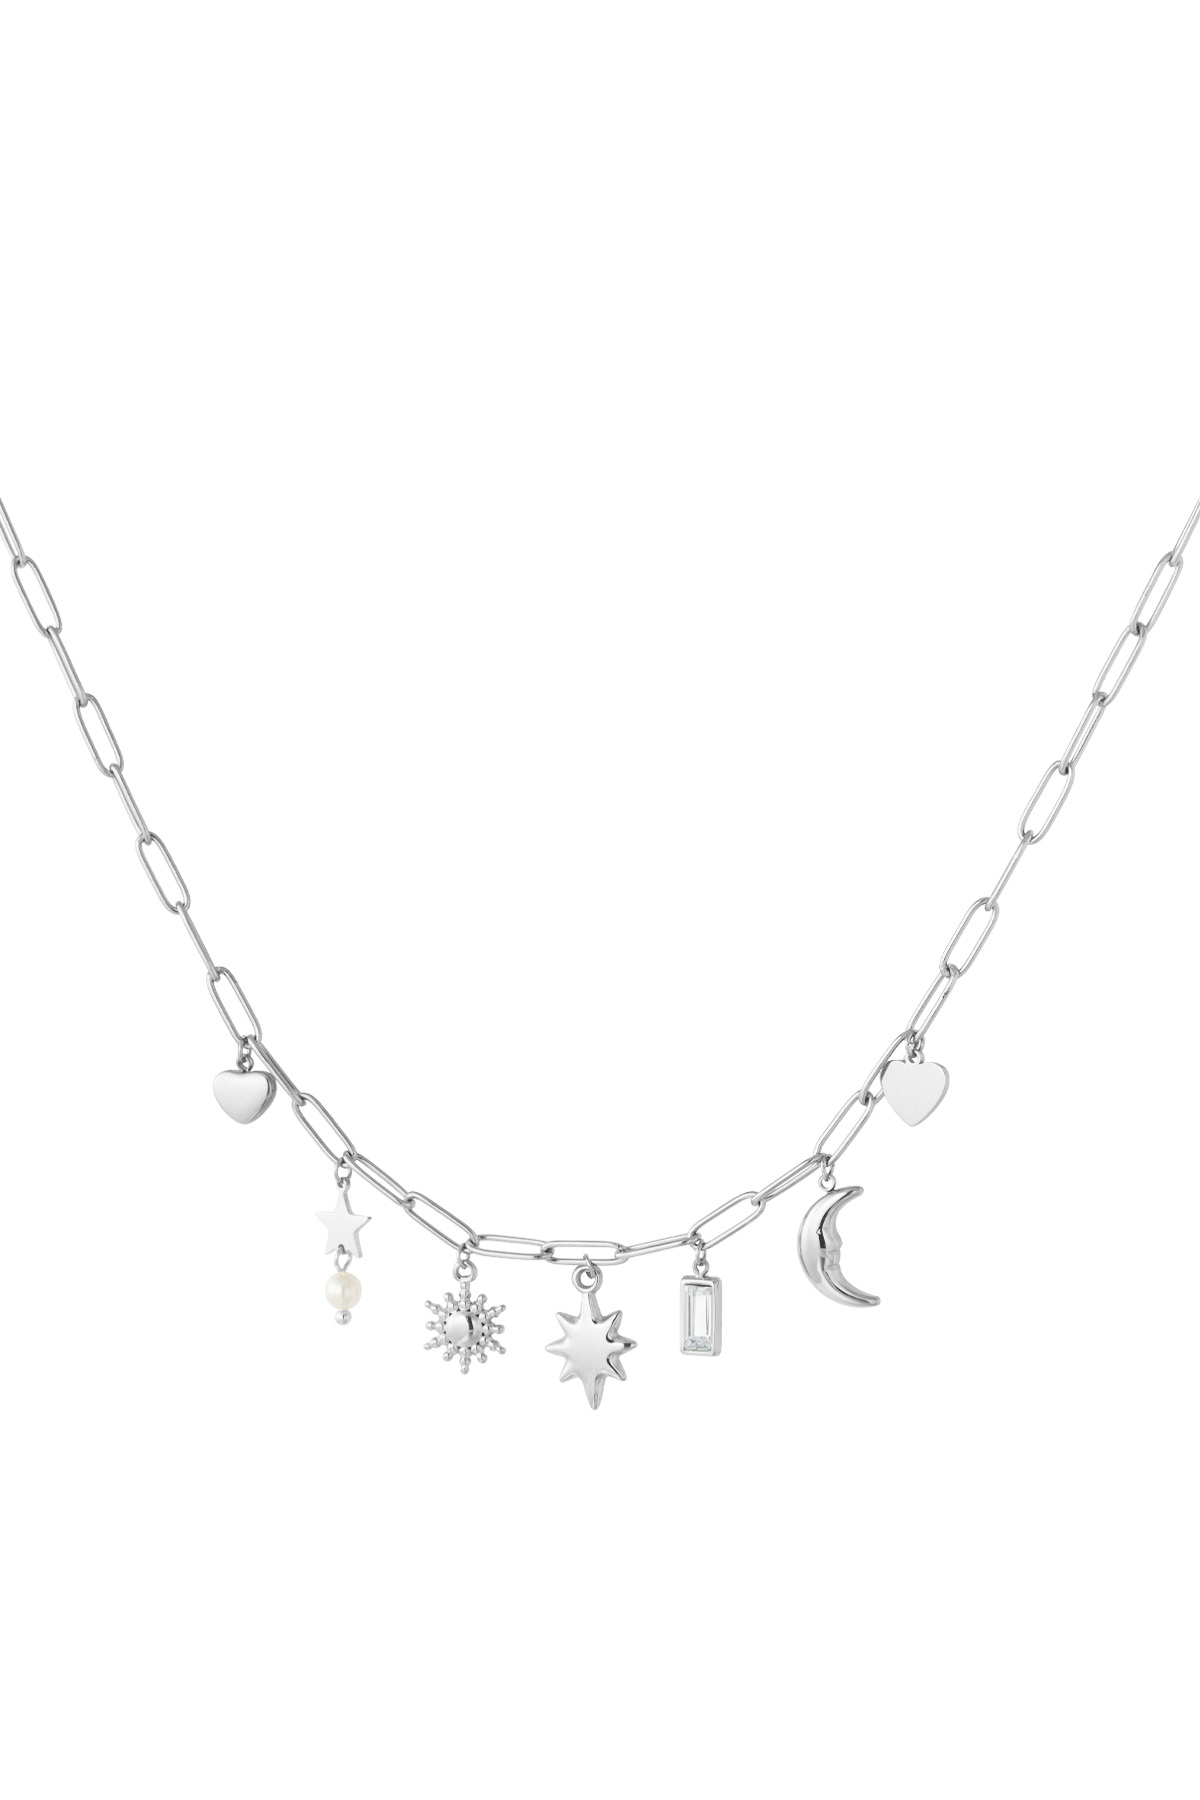 Day and night charm necklace - silver h5 